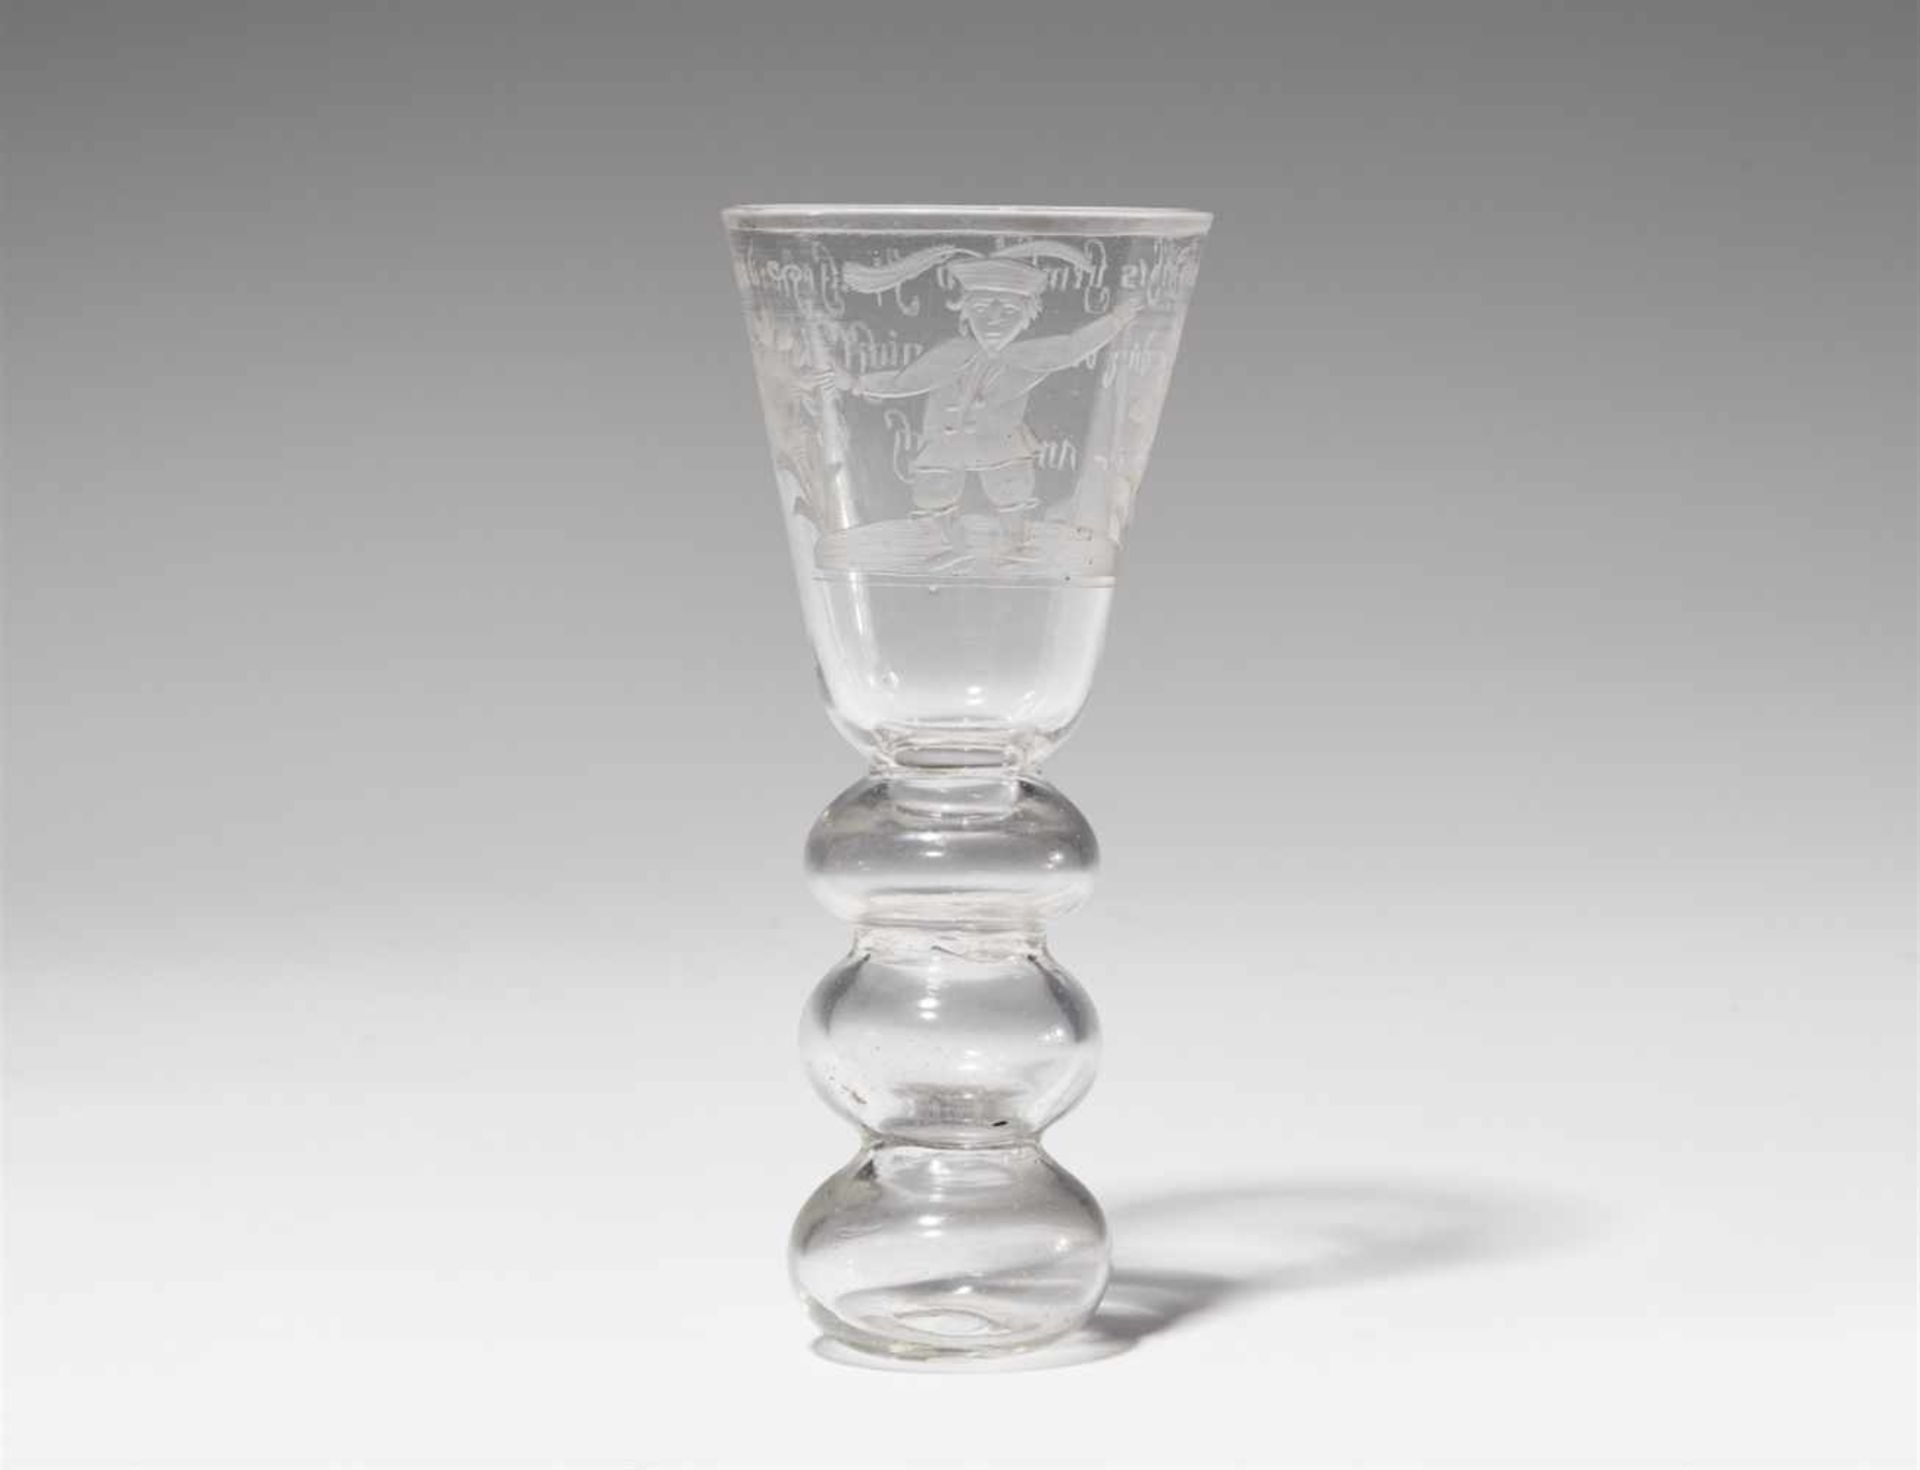 A cut glass beakerTapering cylindrical beaker with hollow shaft. The reverse engraved "Ey wie geth